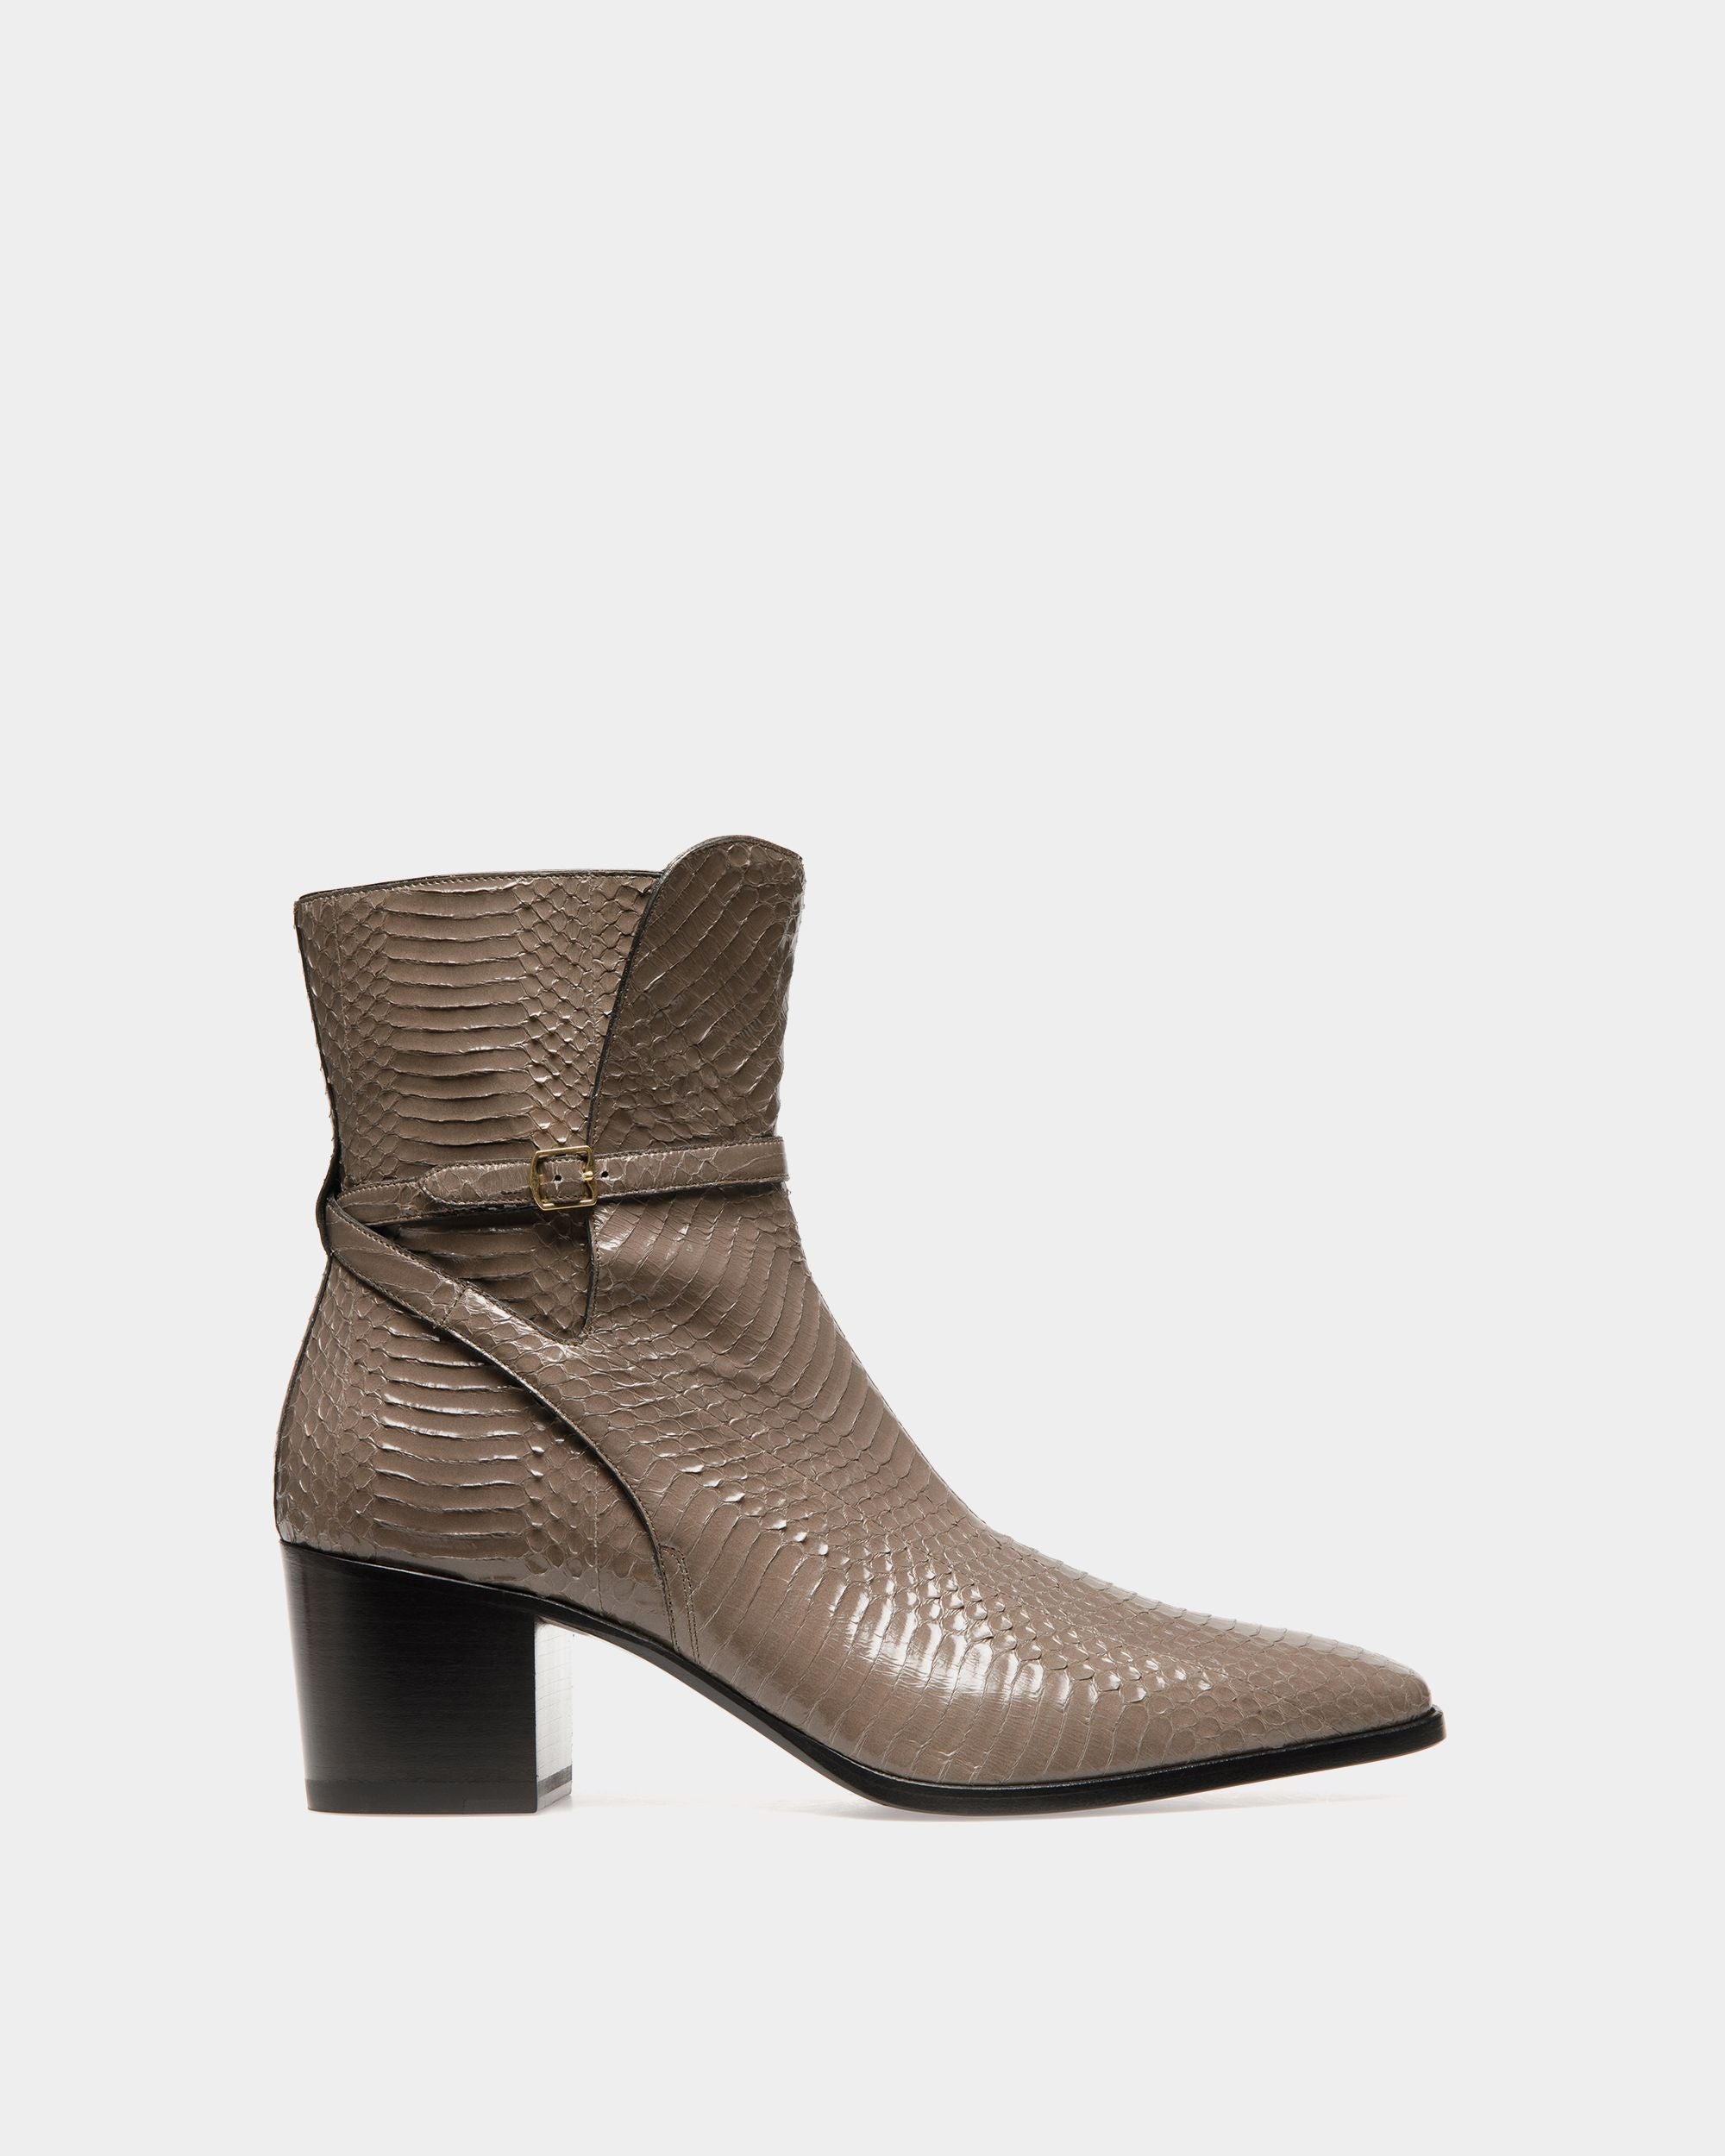 Men's Villy Boots In Grey Leather | Bally | Still Life Side